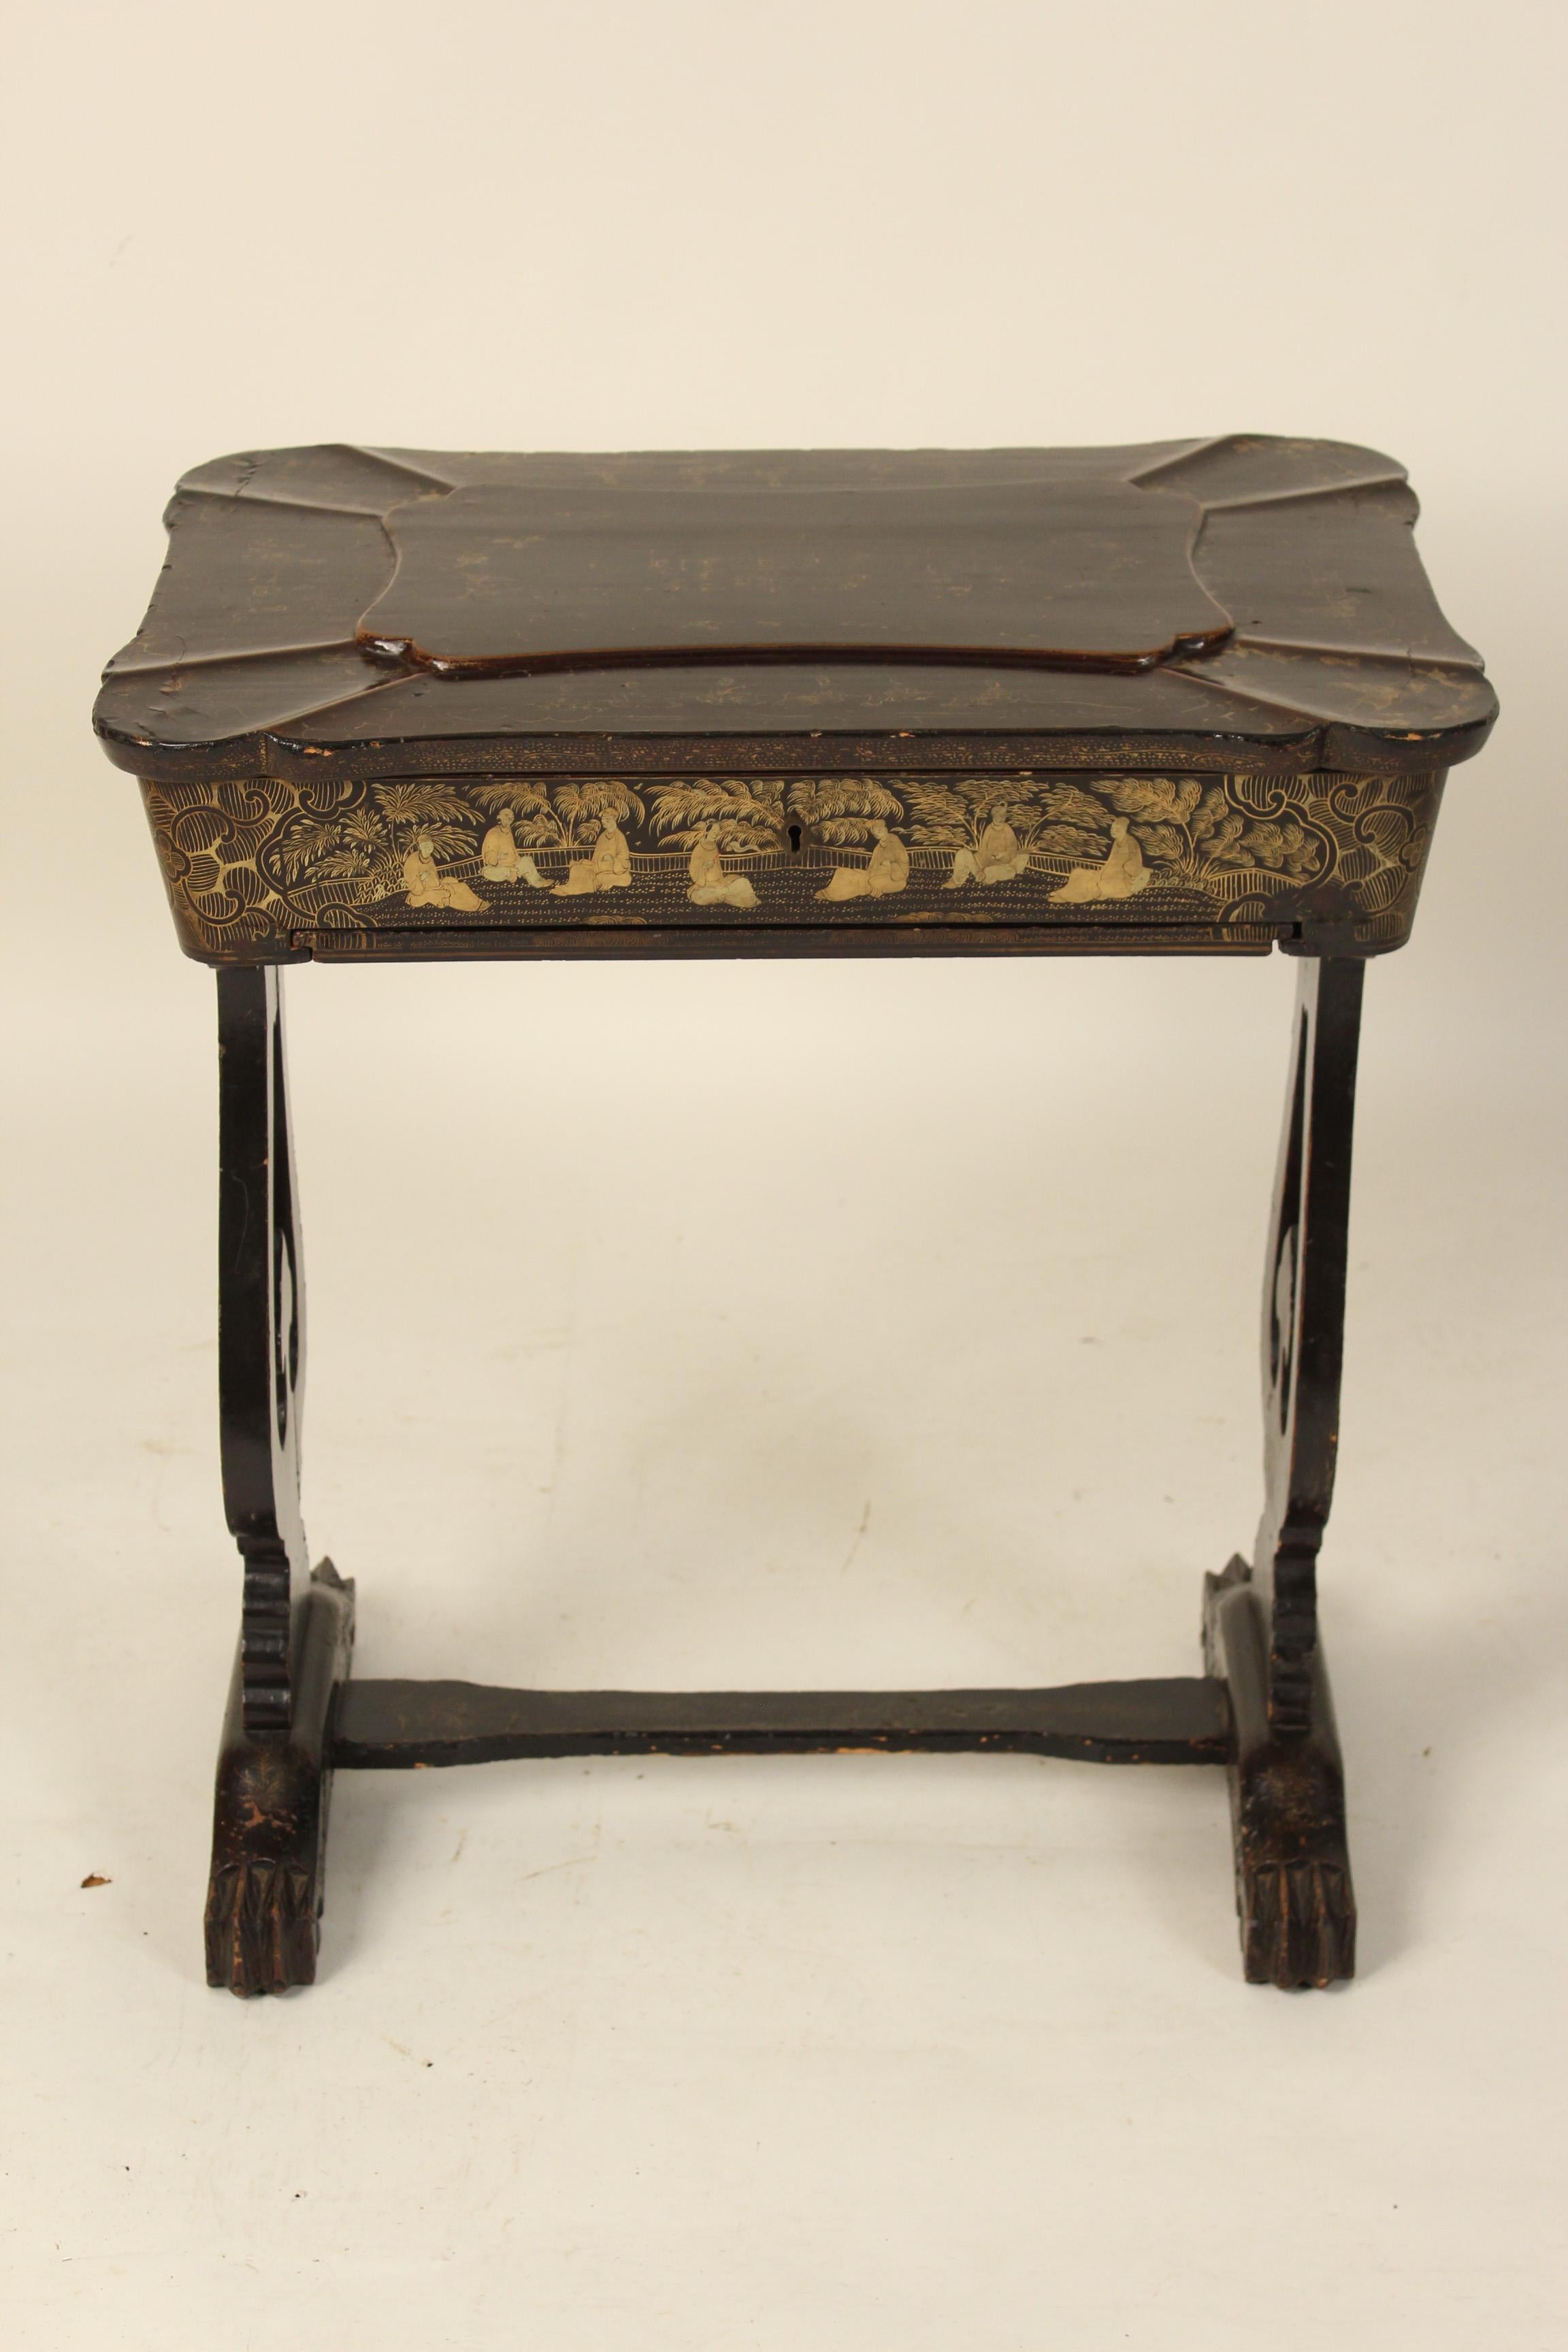 Chinese export black lacquer and gilt decorated sewing / occasional table, late 19th century.